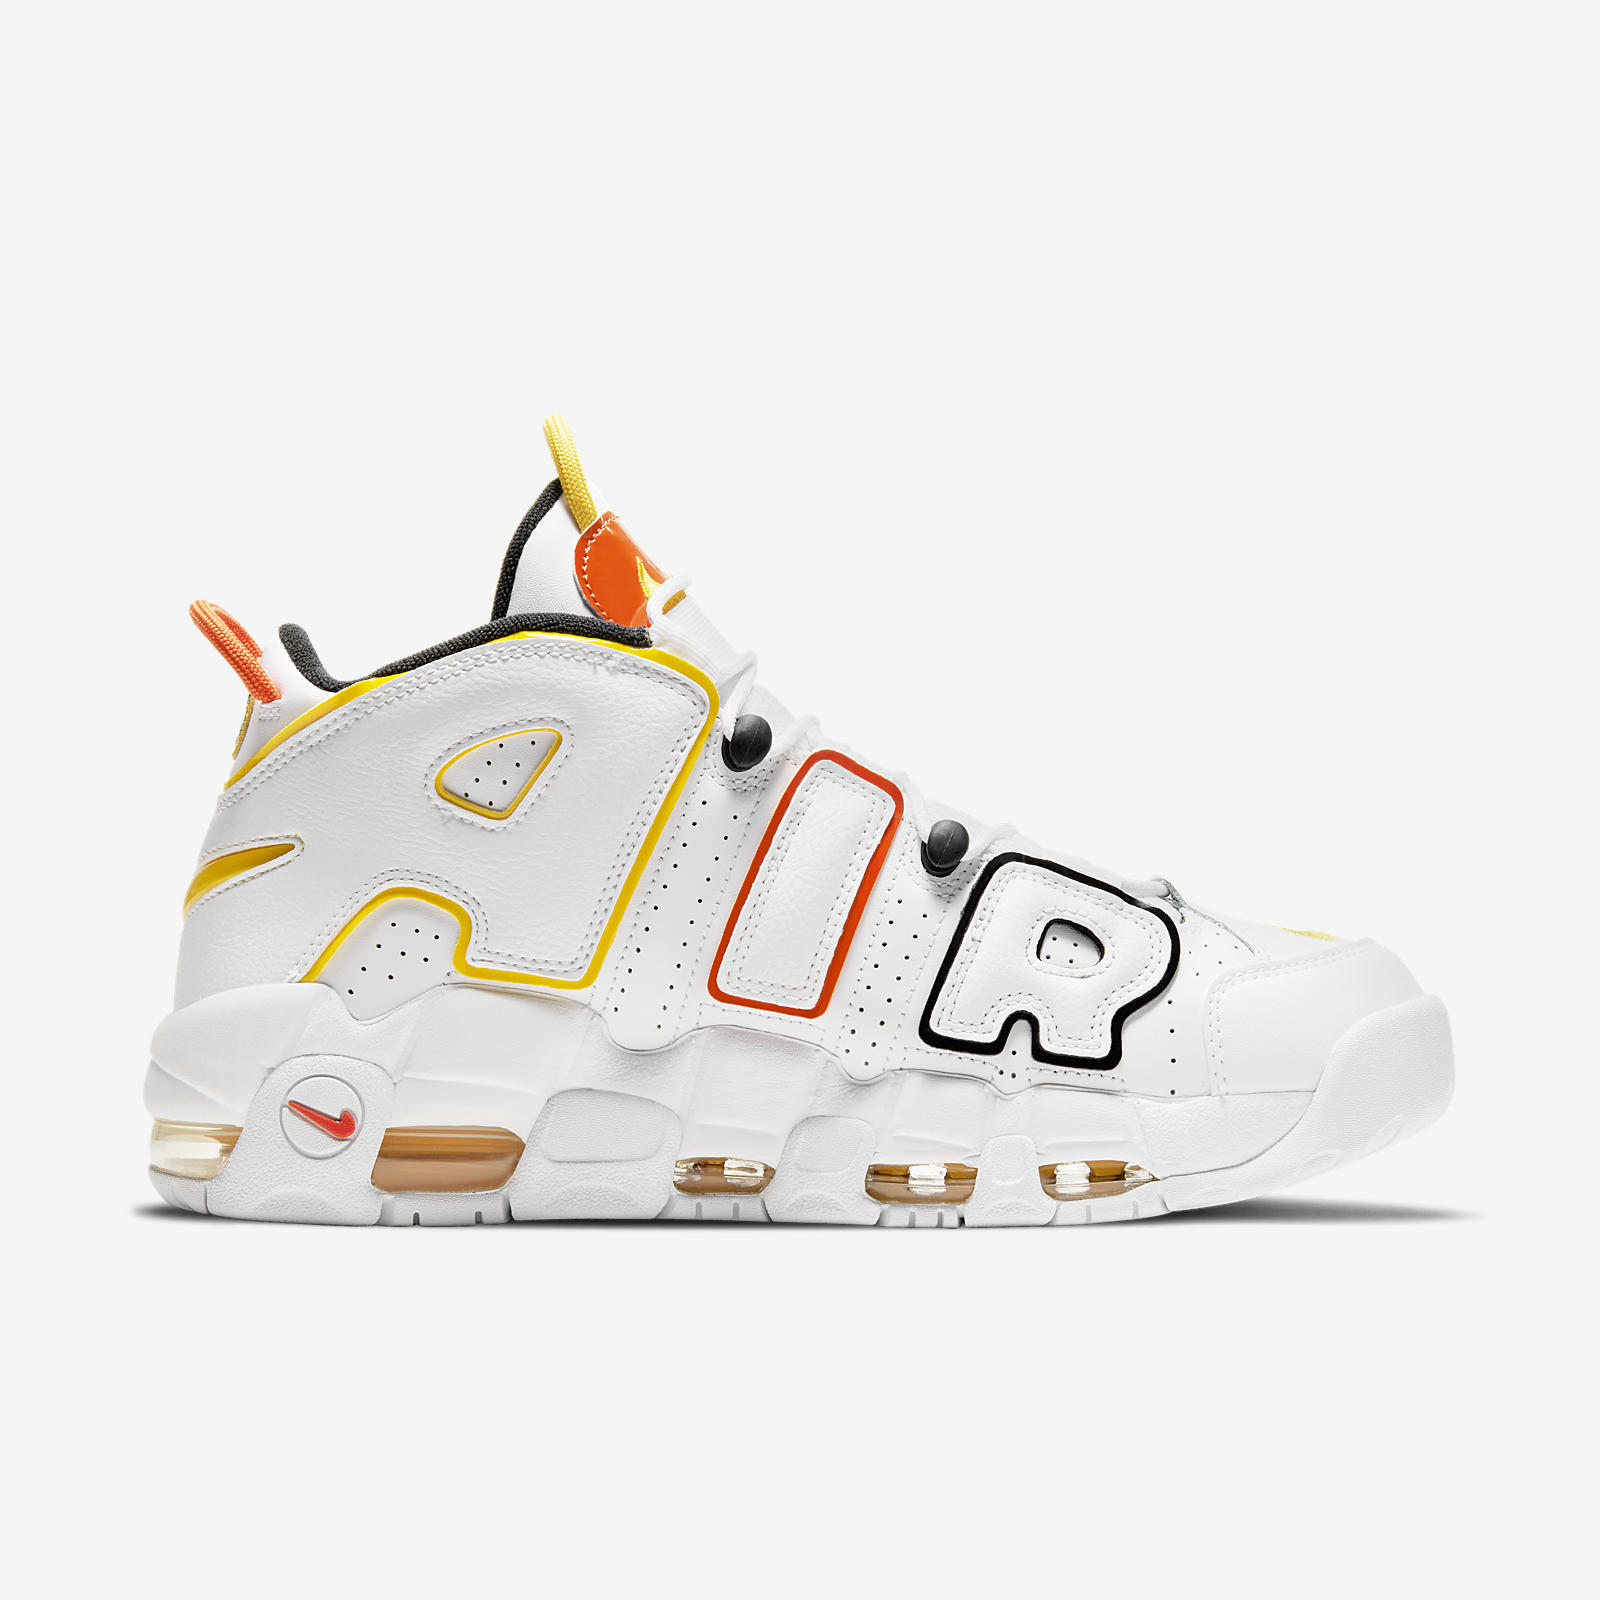 Nike Air More Uptempo
Rayguns